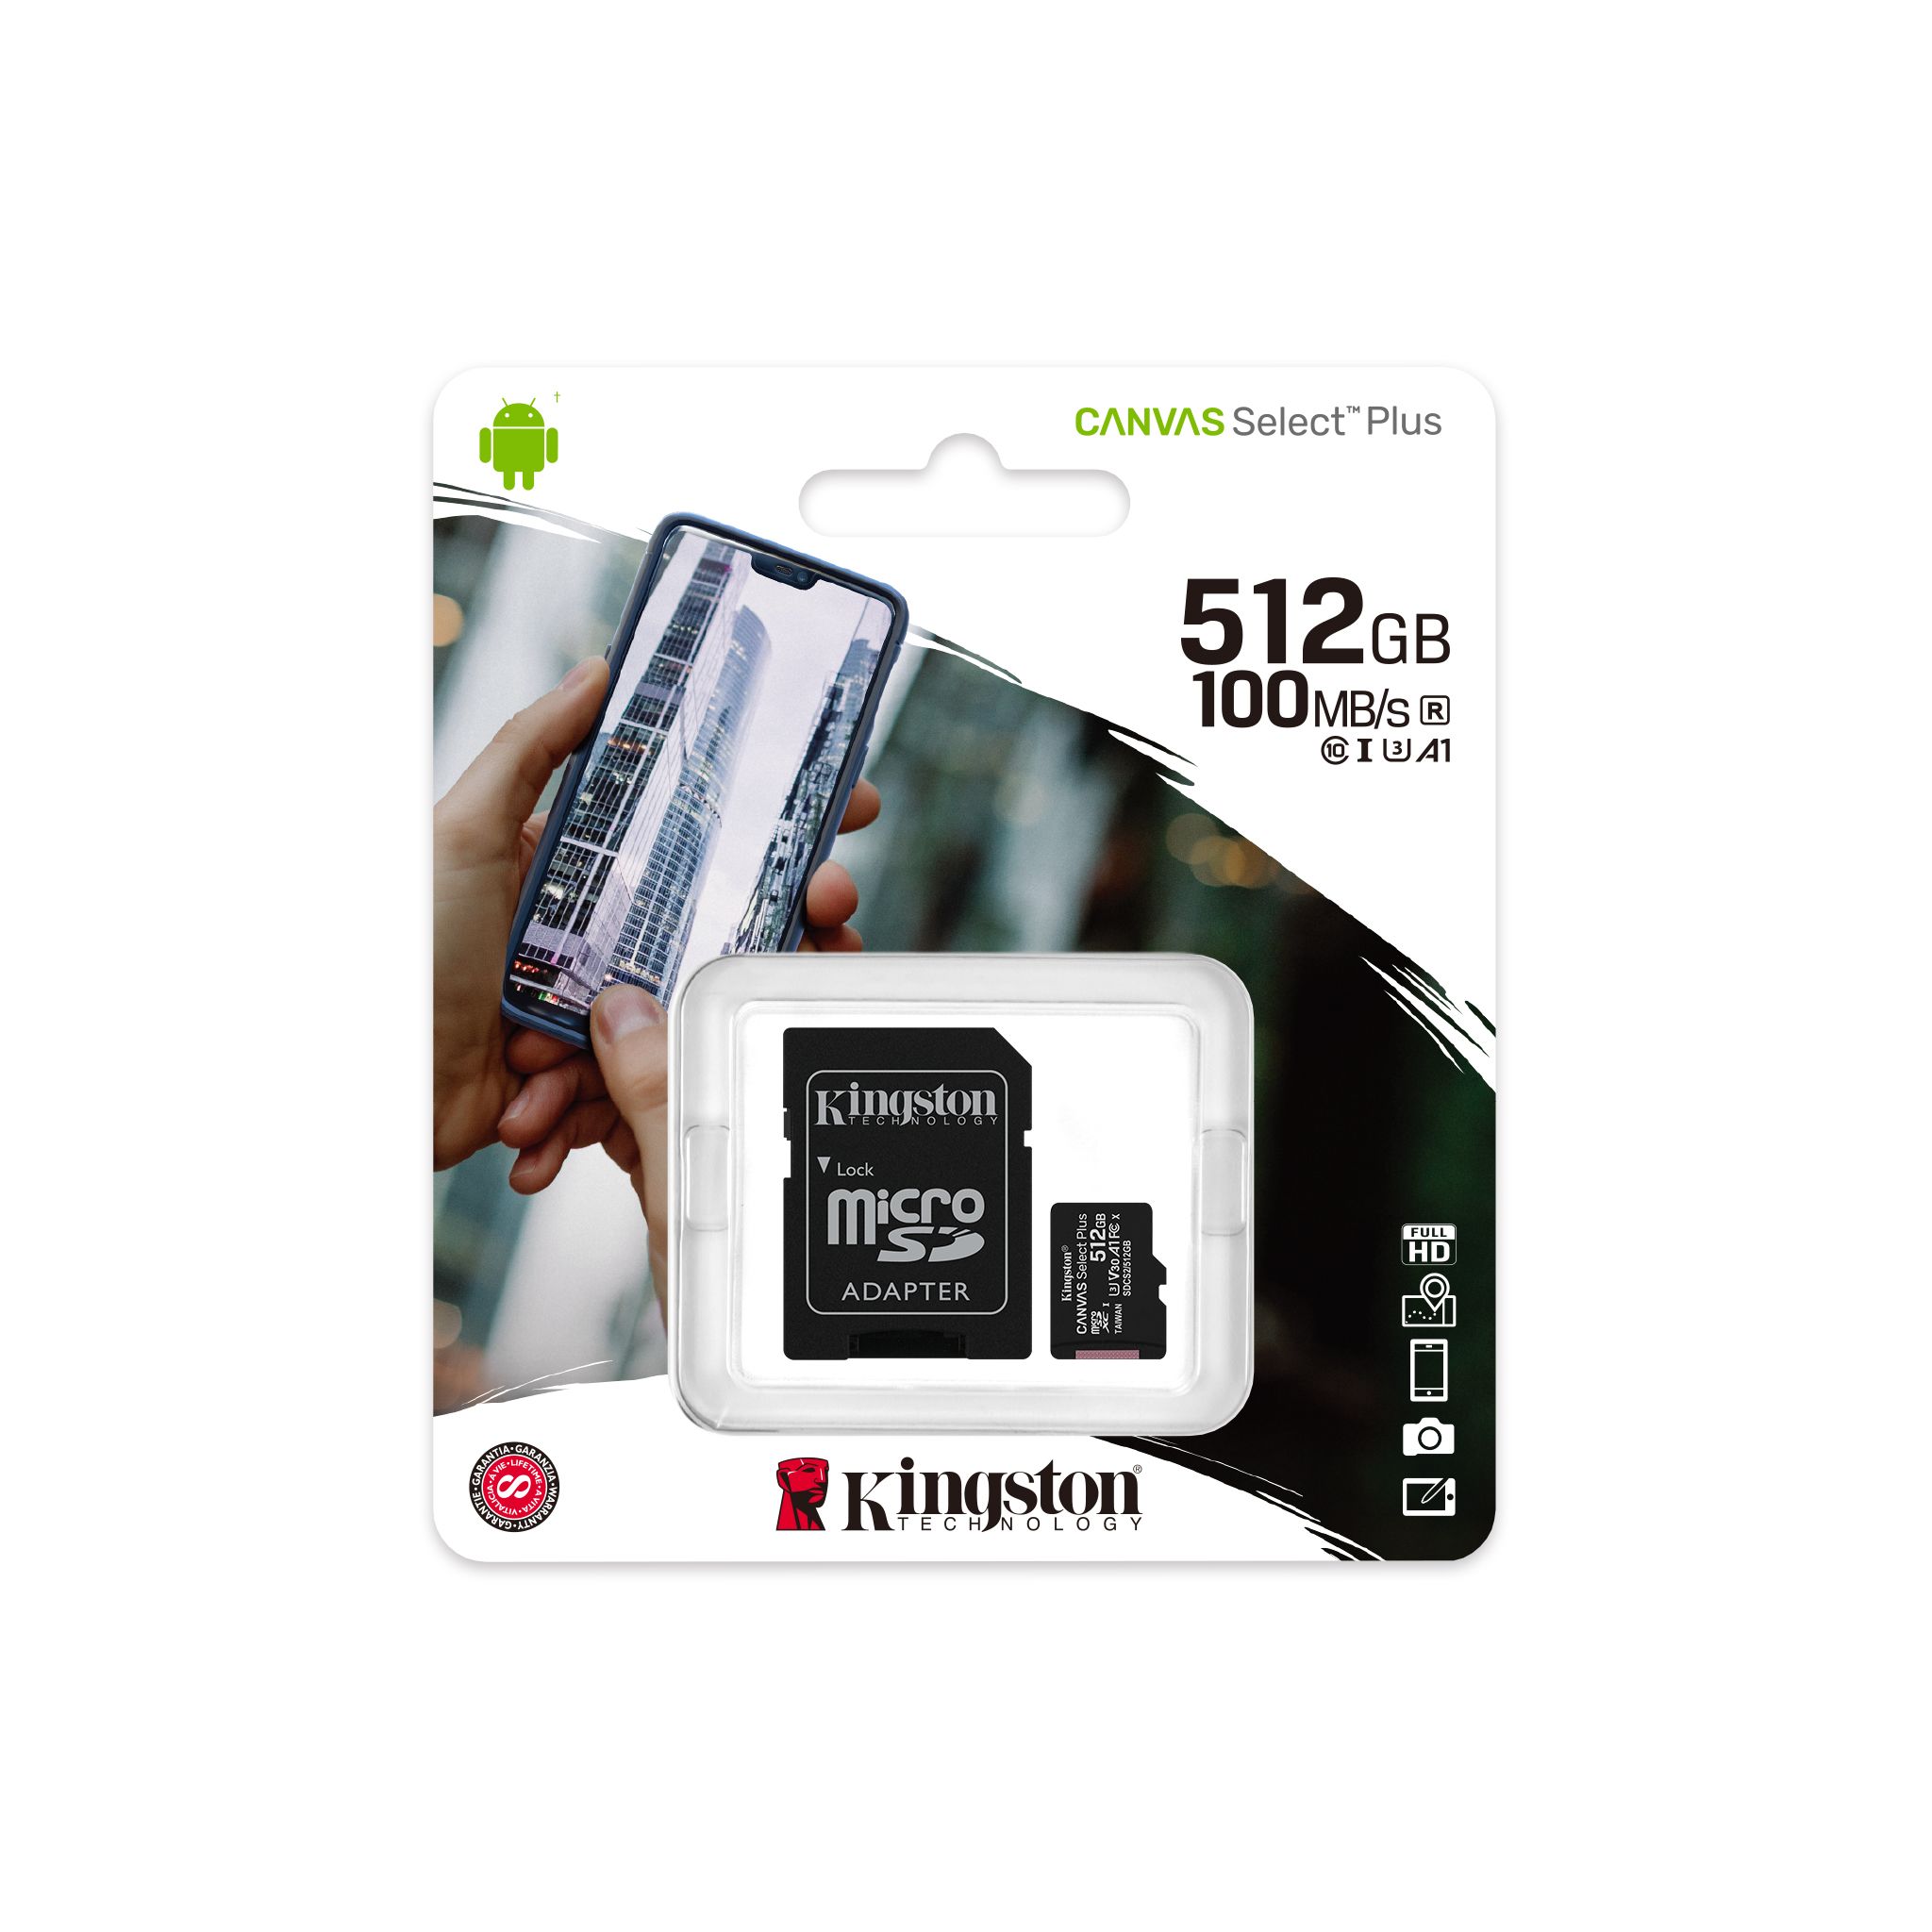 100MBs Works with Kingston Kingston 512GB BLU 8L MicroSDXC Canvas Select Plus Card Verified by SanFlash. 